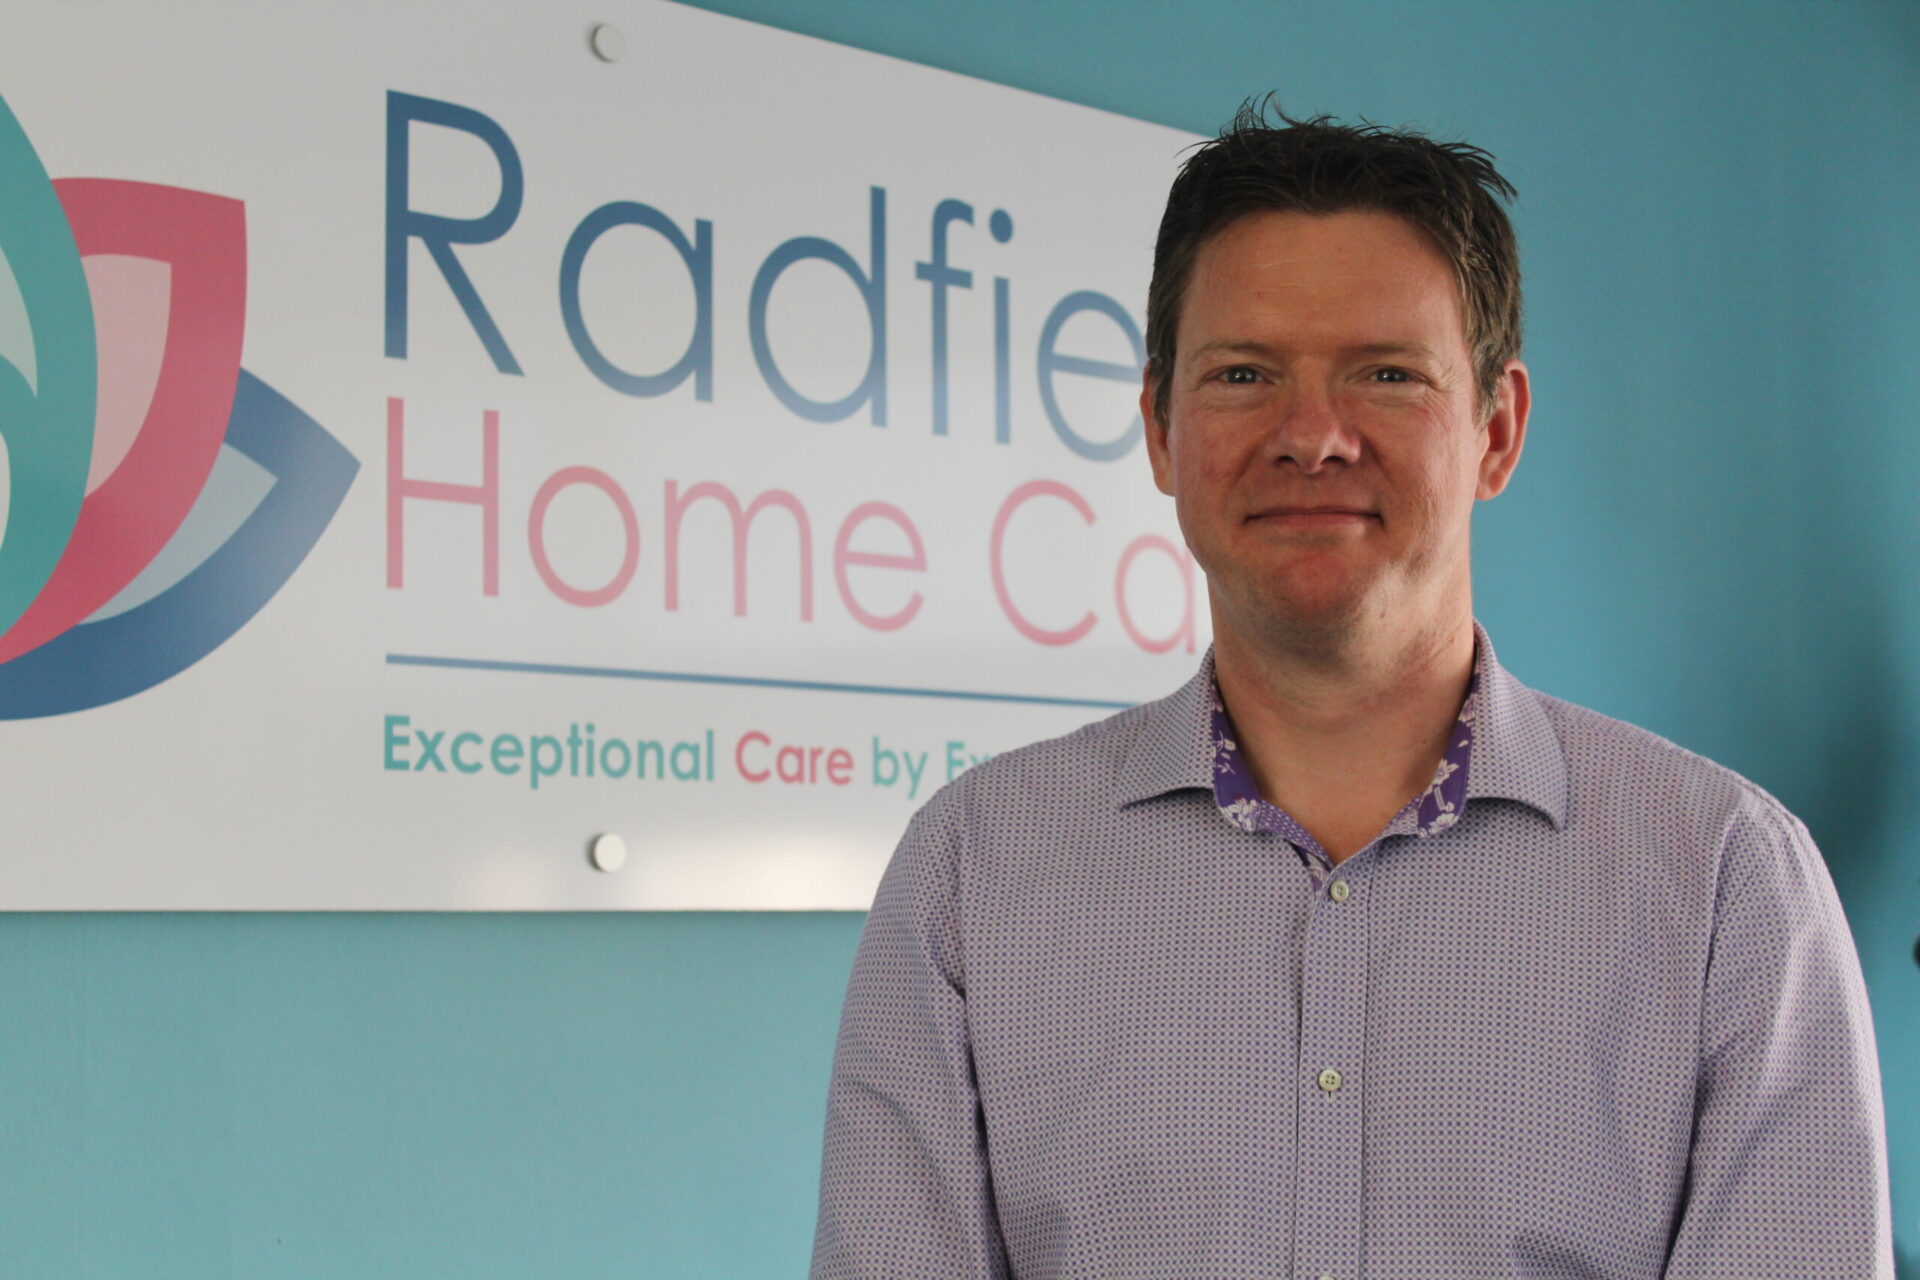 Radfield Home Care appoints new operations director